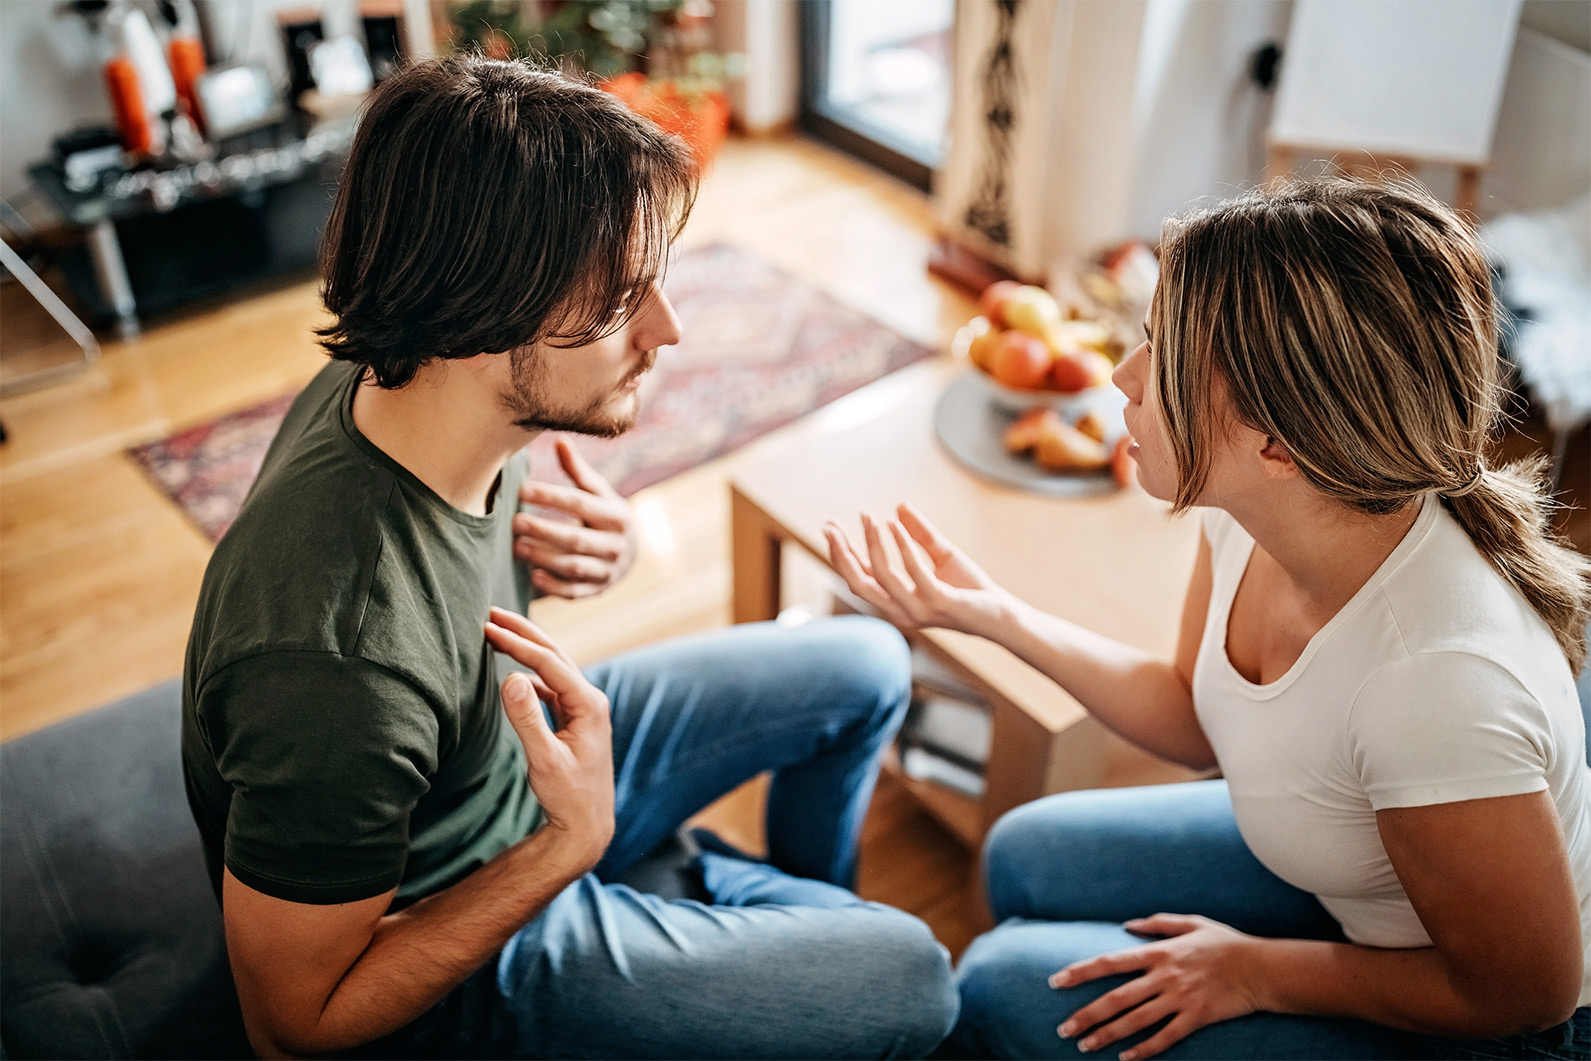 Betrayal Trauma in a Relationship: What Is It?